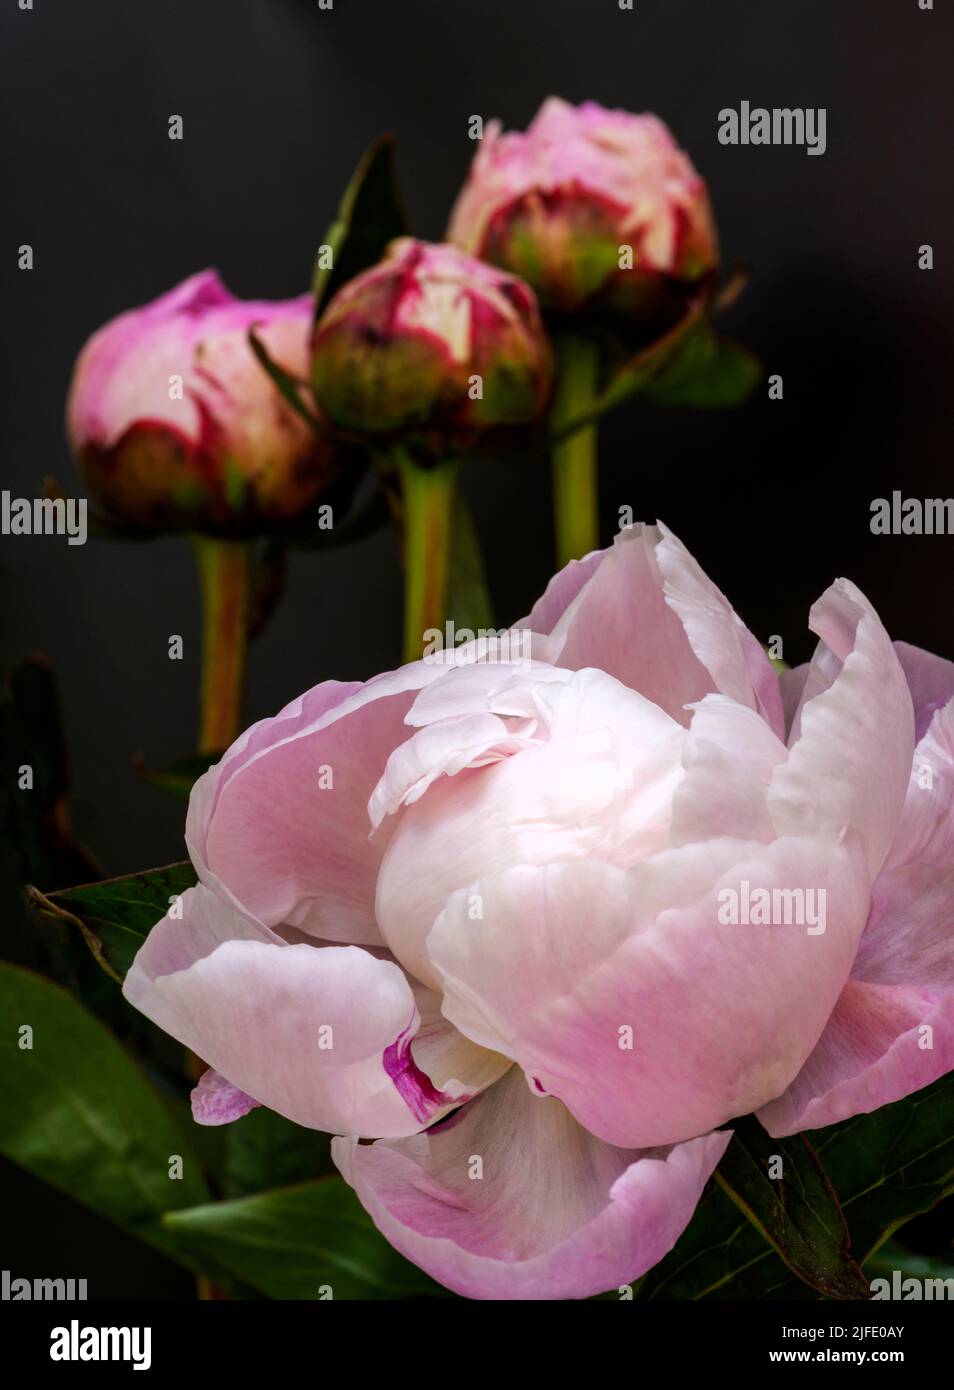 A beautiful pink Peony flower which is shortly to open, with three buds in the background. The folded petals look like swan feathers. Stock Photo